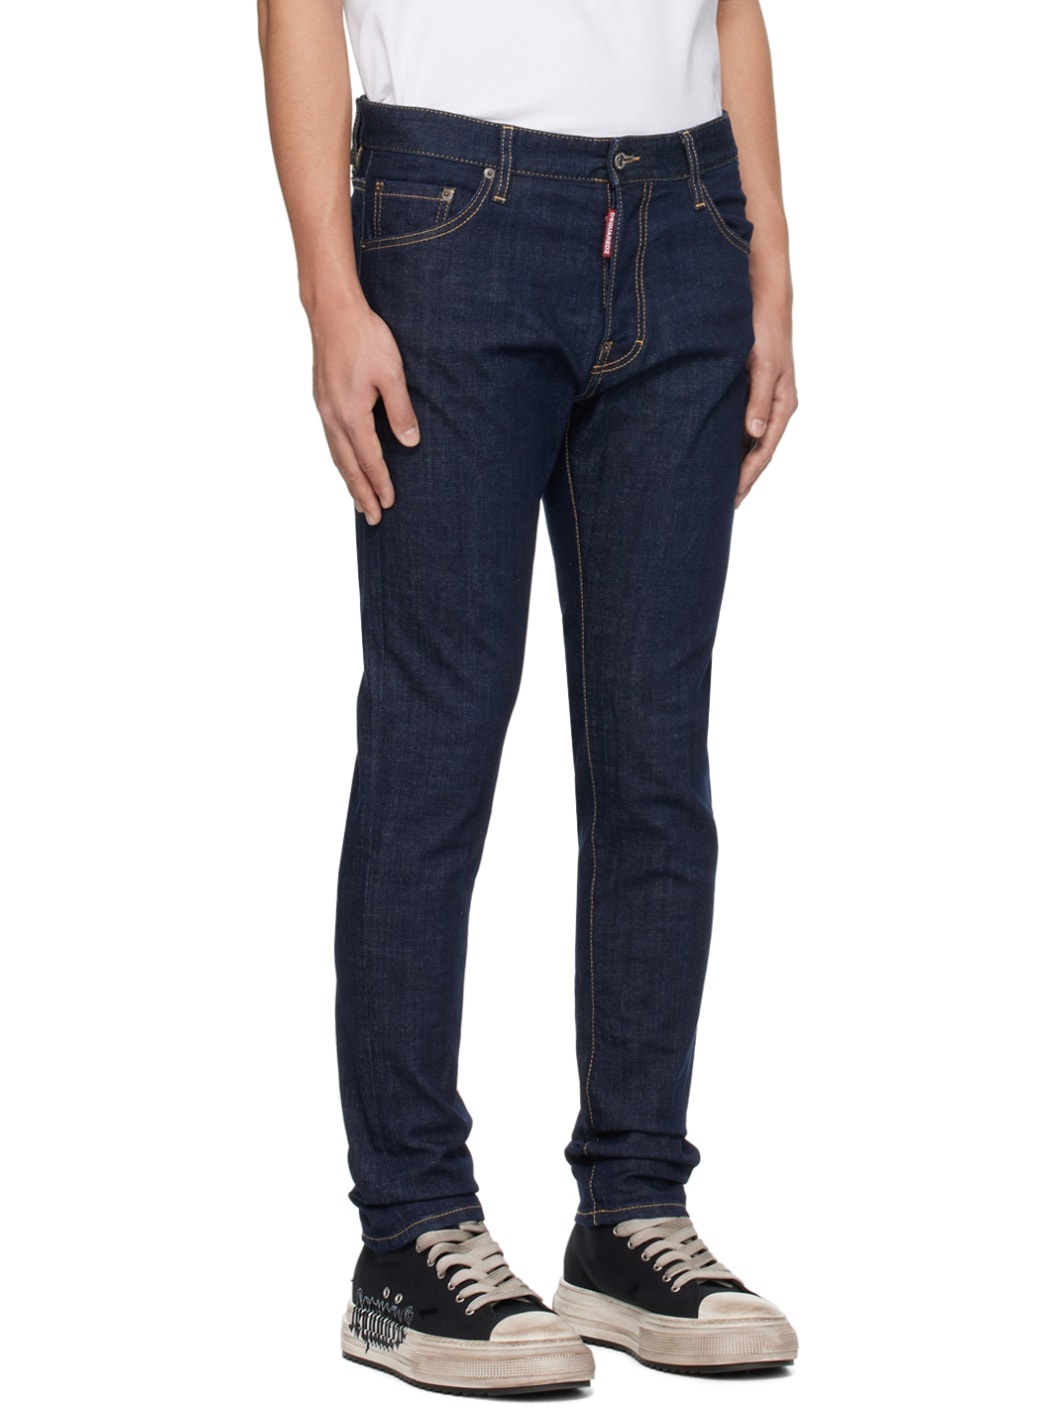 Navy Cool Guy Jeans - 2